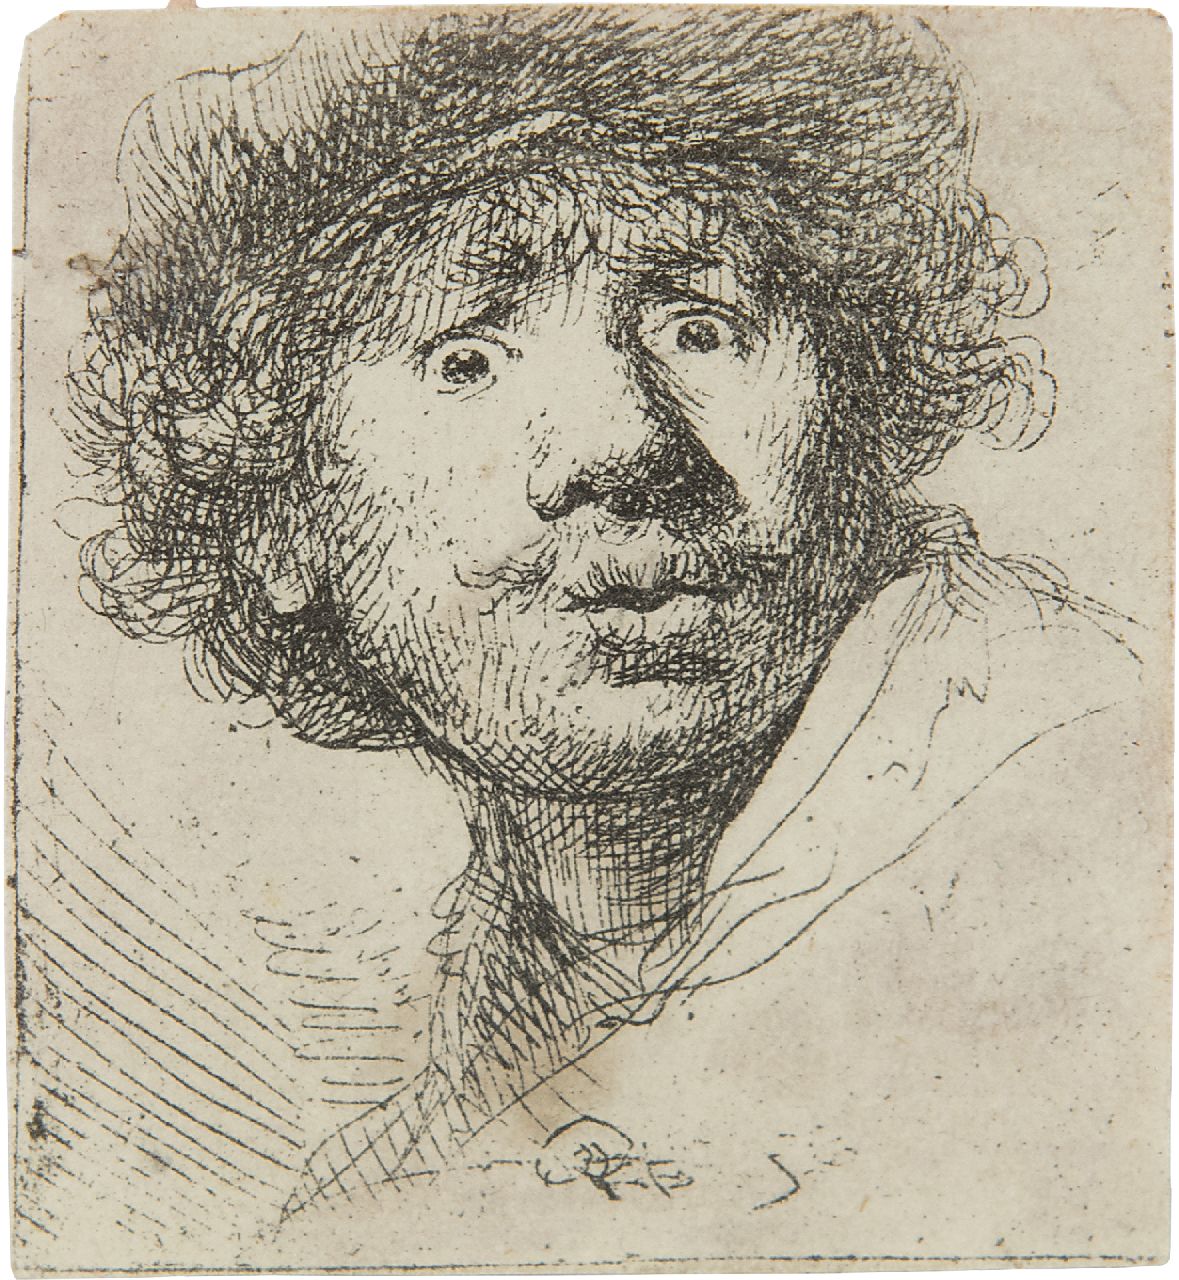 Rembrandt (Rembrandt Harmensz. van Rijn)   | Rembrandt (Rembrandt Harmensz. van Rijn) | Prints and Multiples offered for sale | Rembrandt in a cap, open mouthed and staring, etching 4.9 x 4.3 cm, signed m.c. (in the plate) and dated 1630